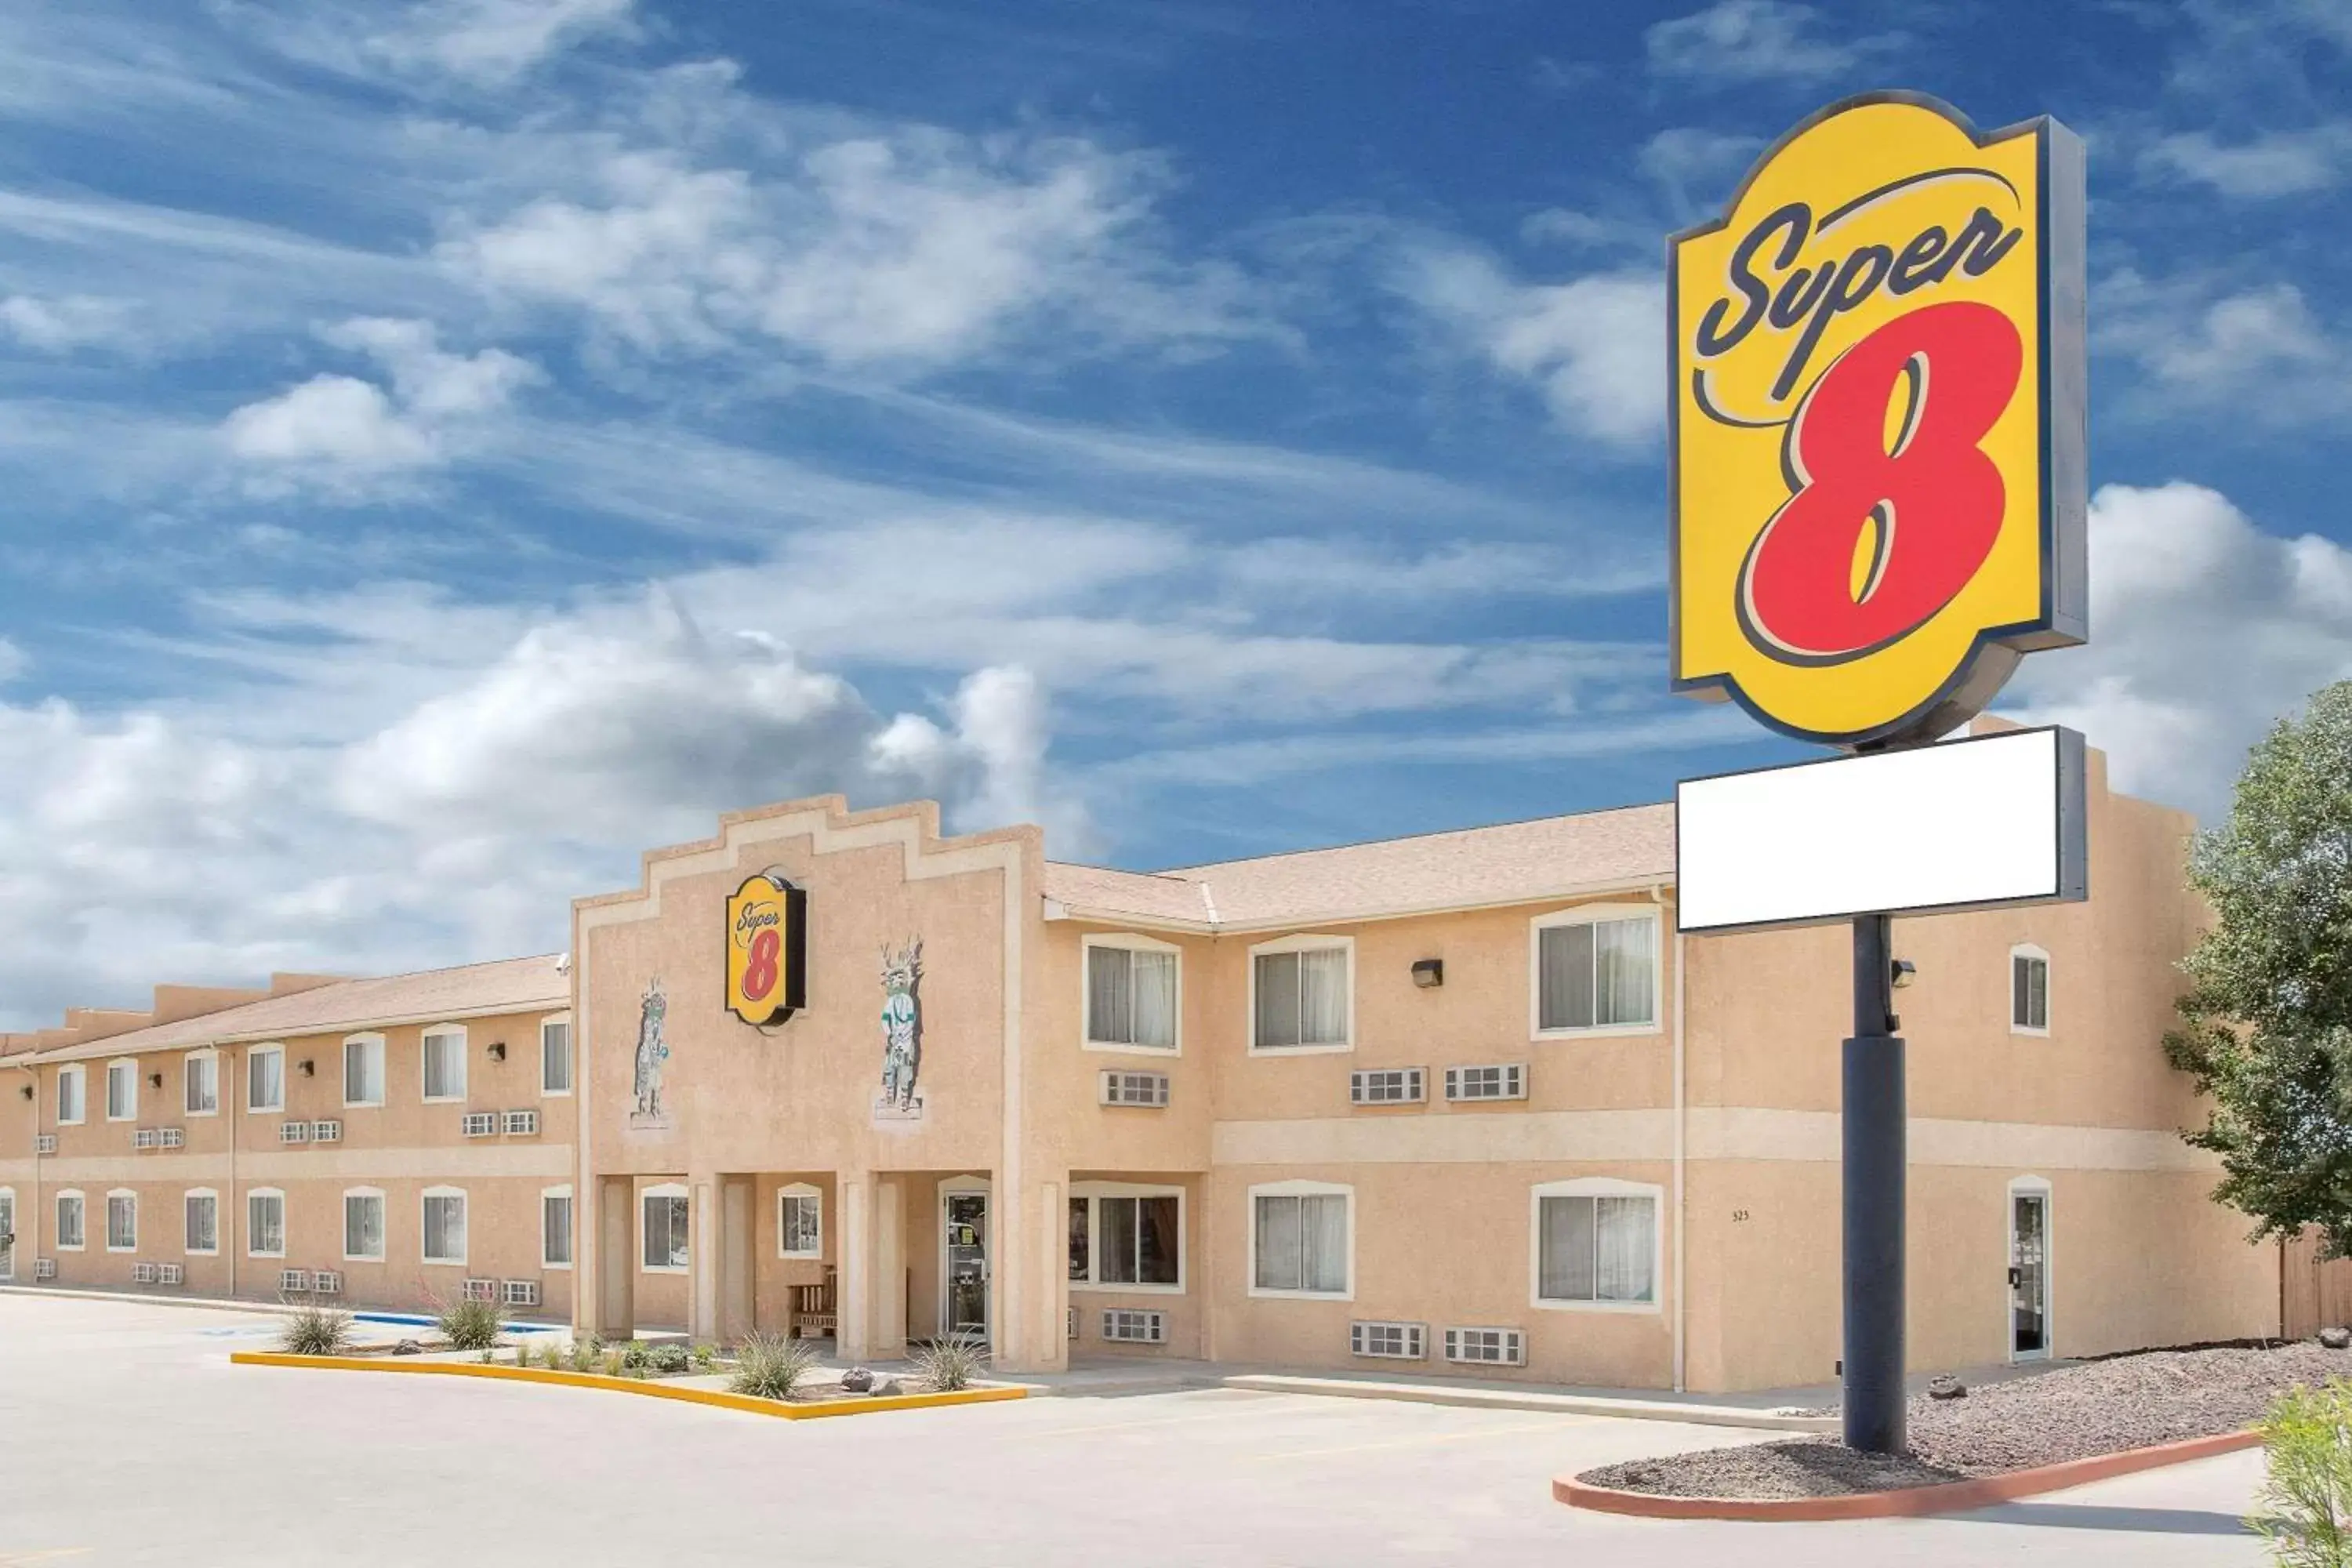 Property building in Super 8 by Wyndham Bloomfield